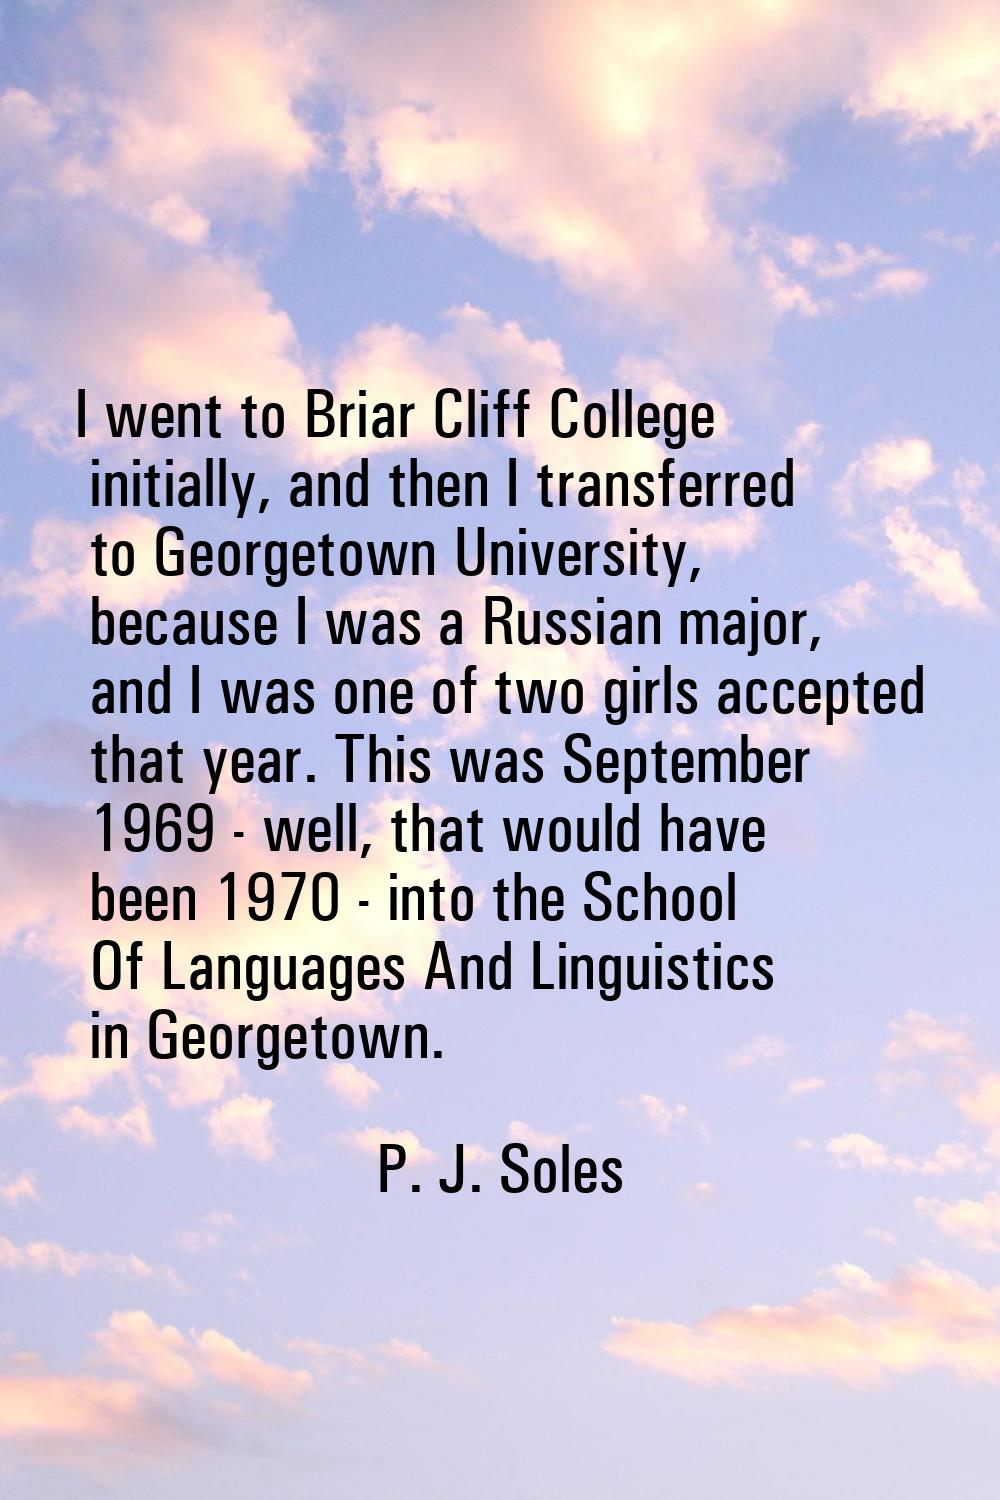 I went to Briar Cliff College initially, and then I transferred to Georgetown University, because I